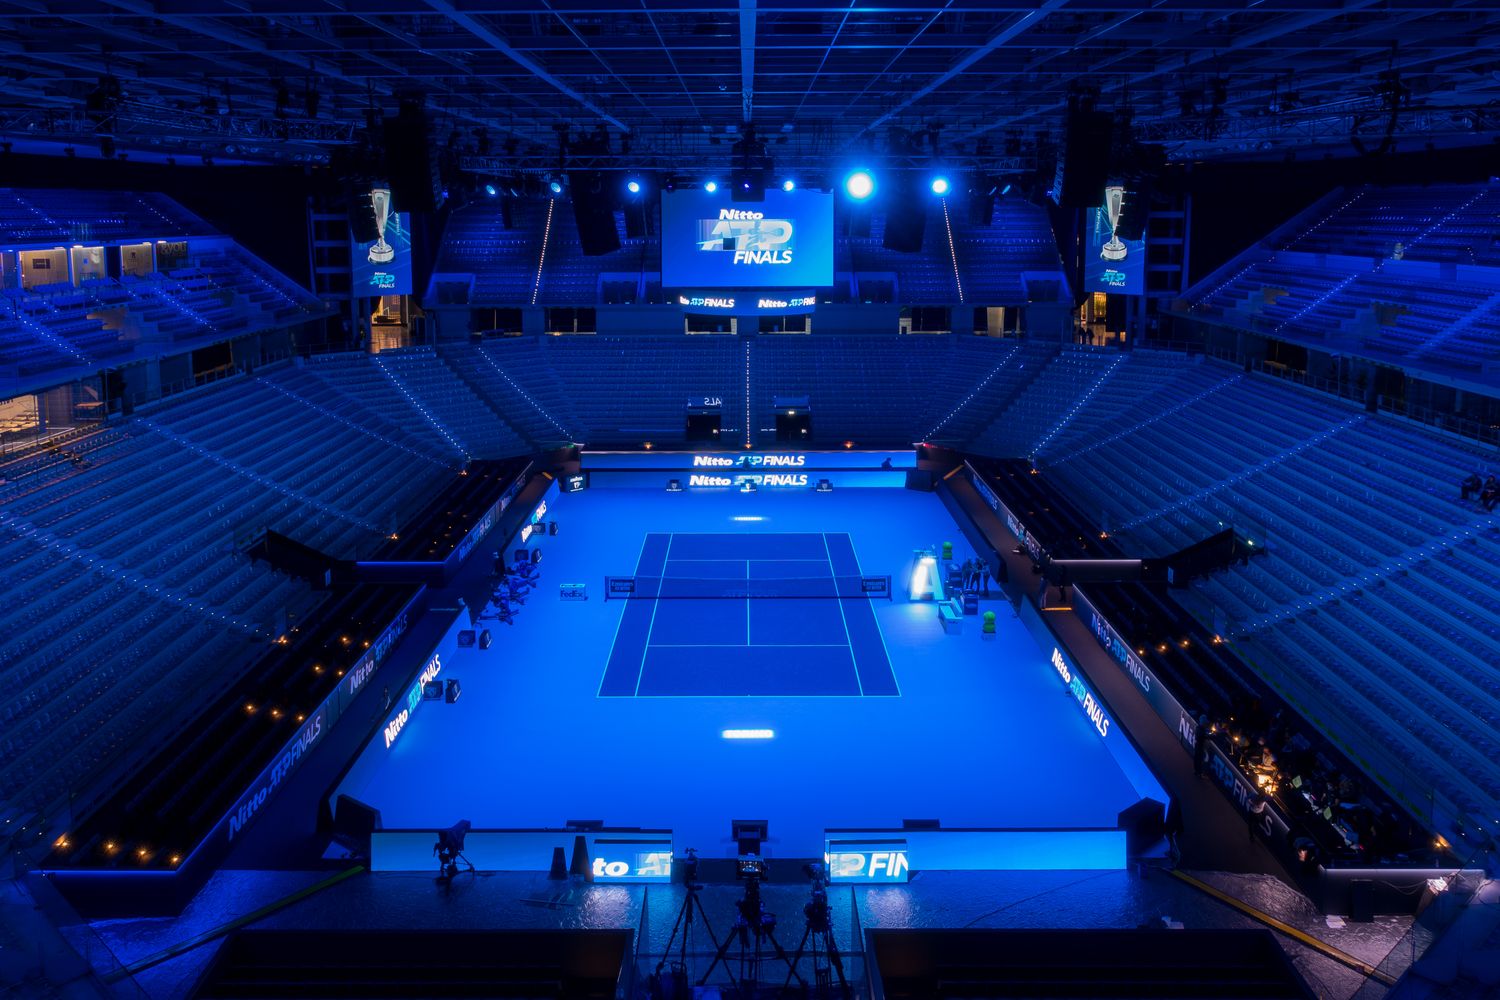 The central tennis court of Nitto ATP Finals inside Pala Alpitour